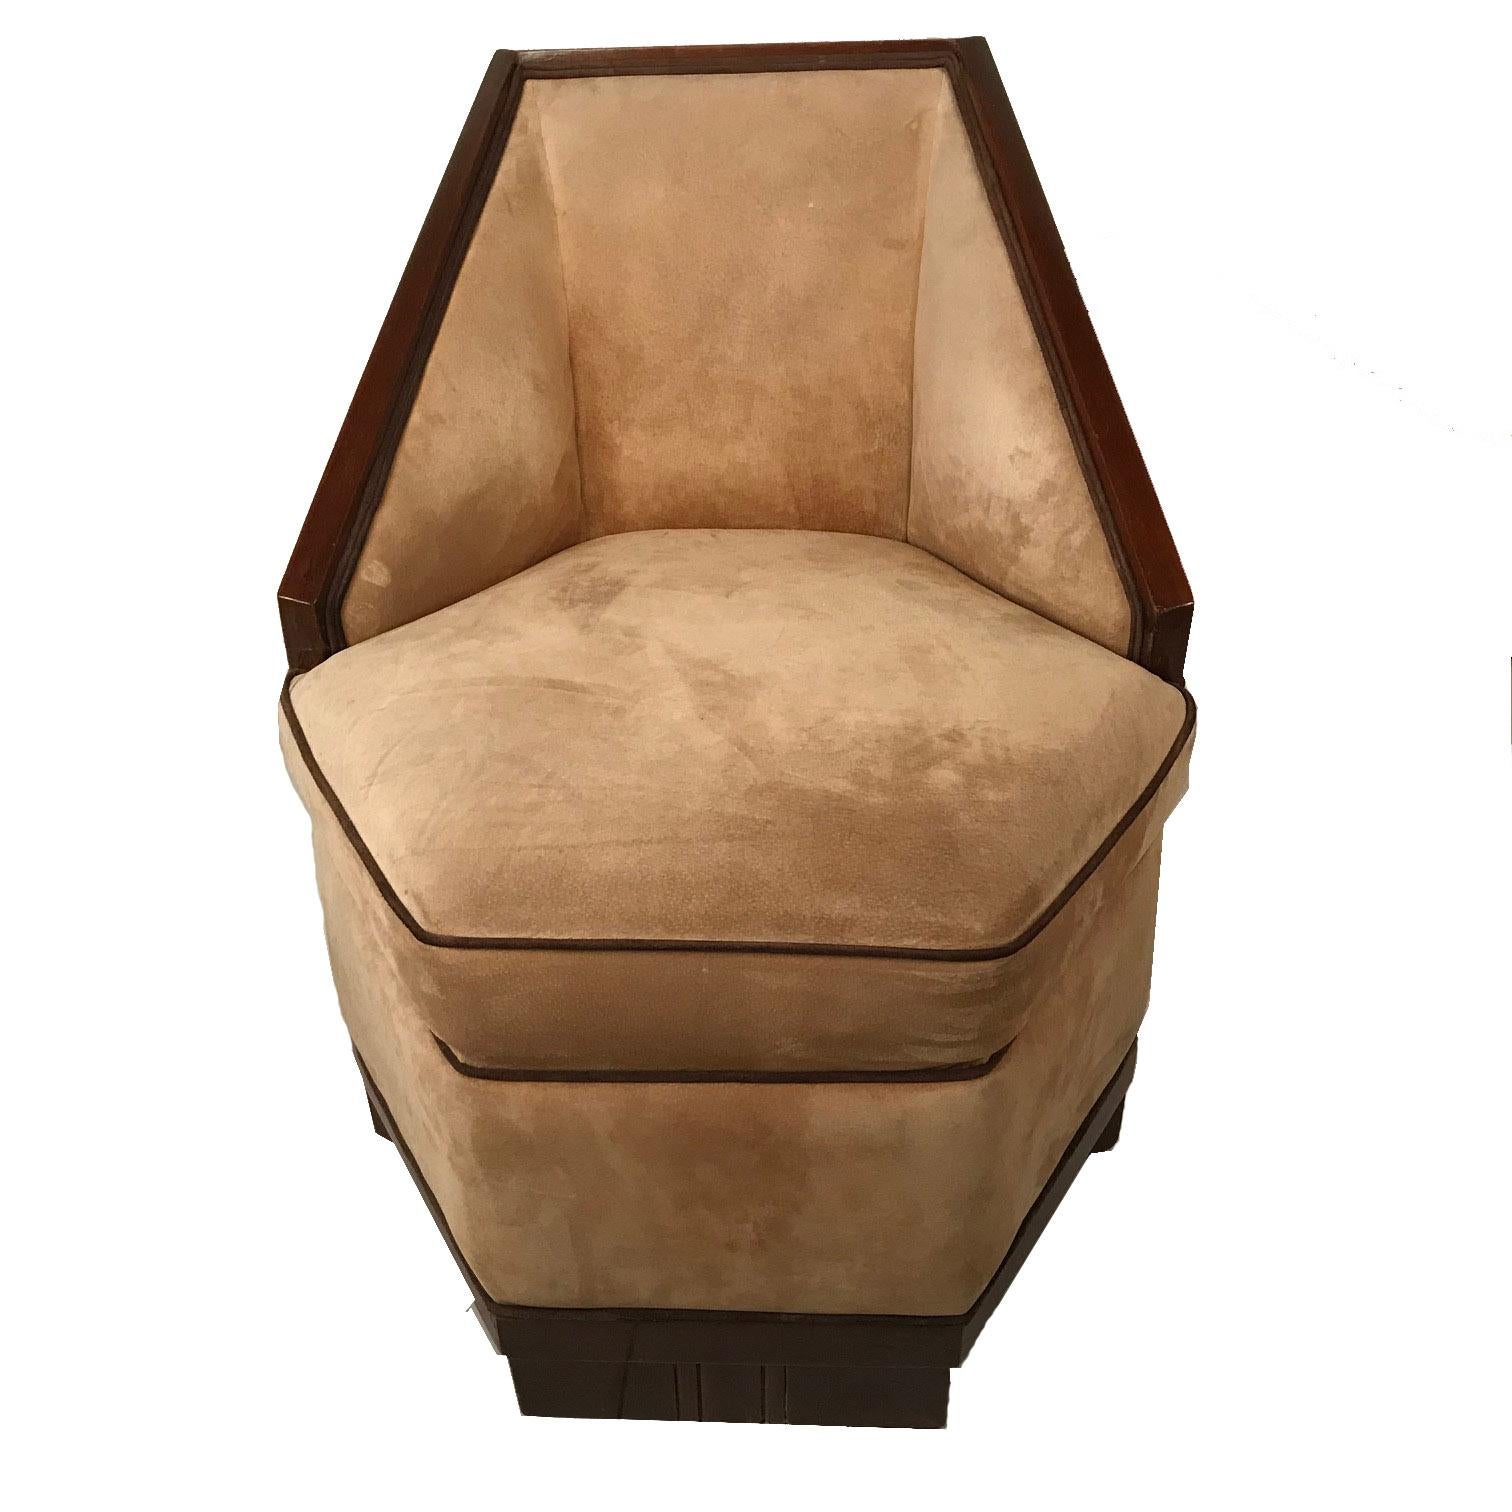 This very stylish armchair made by 